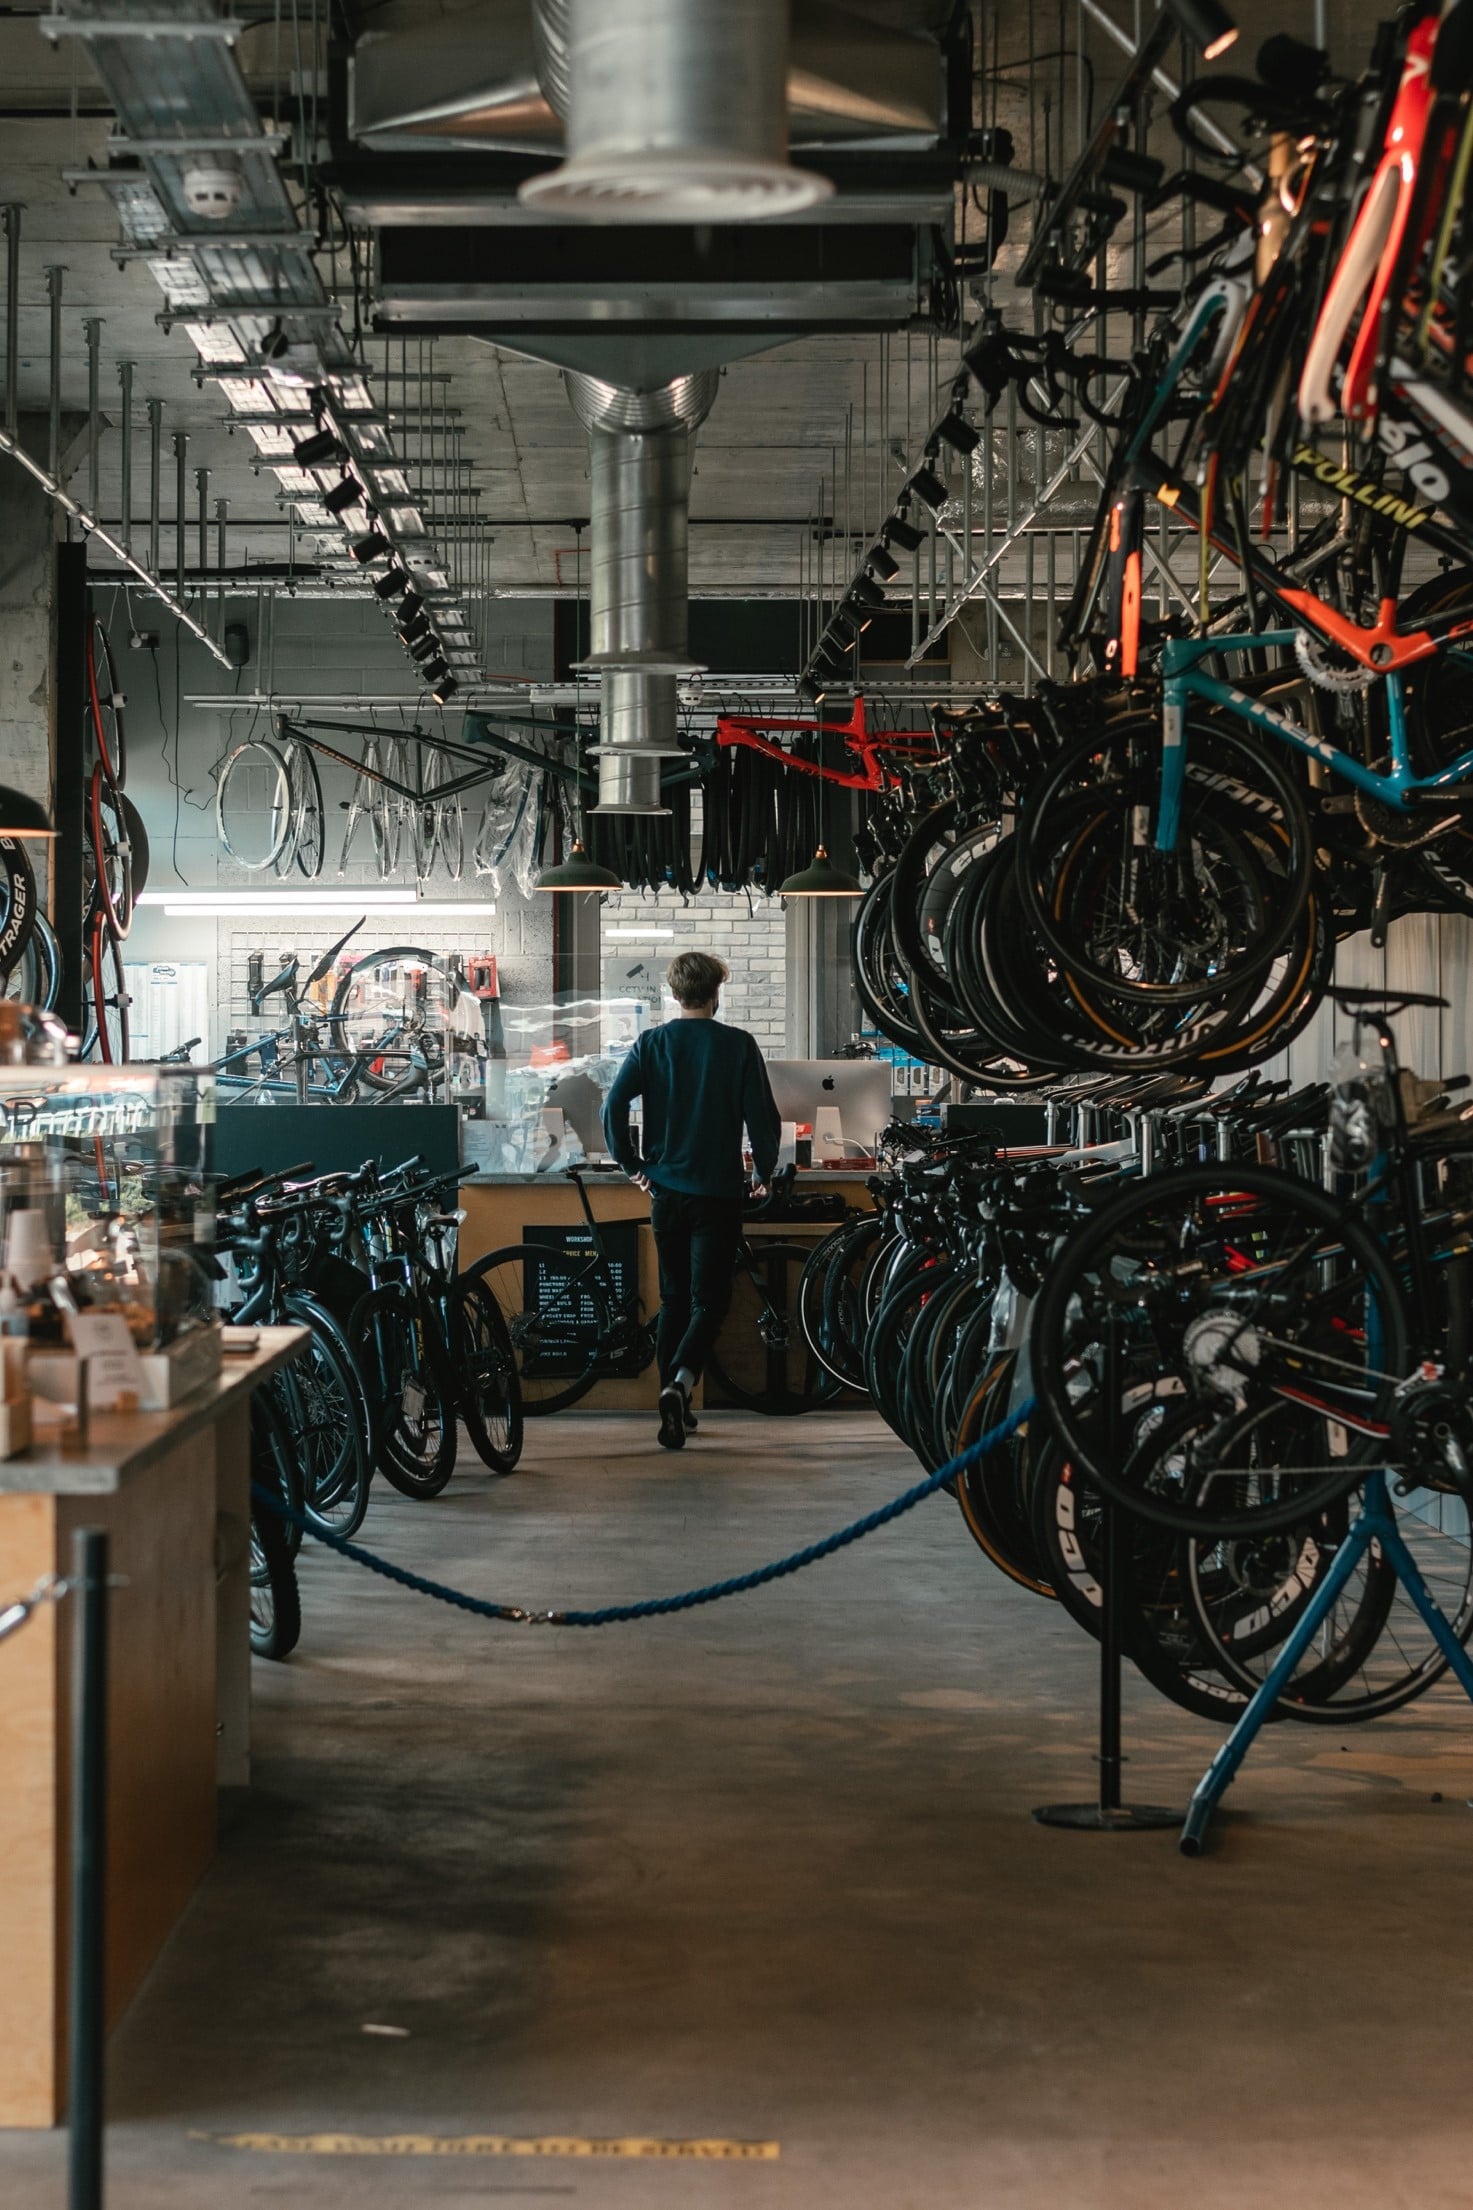 So, still thinking about opening a bike shop?